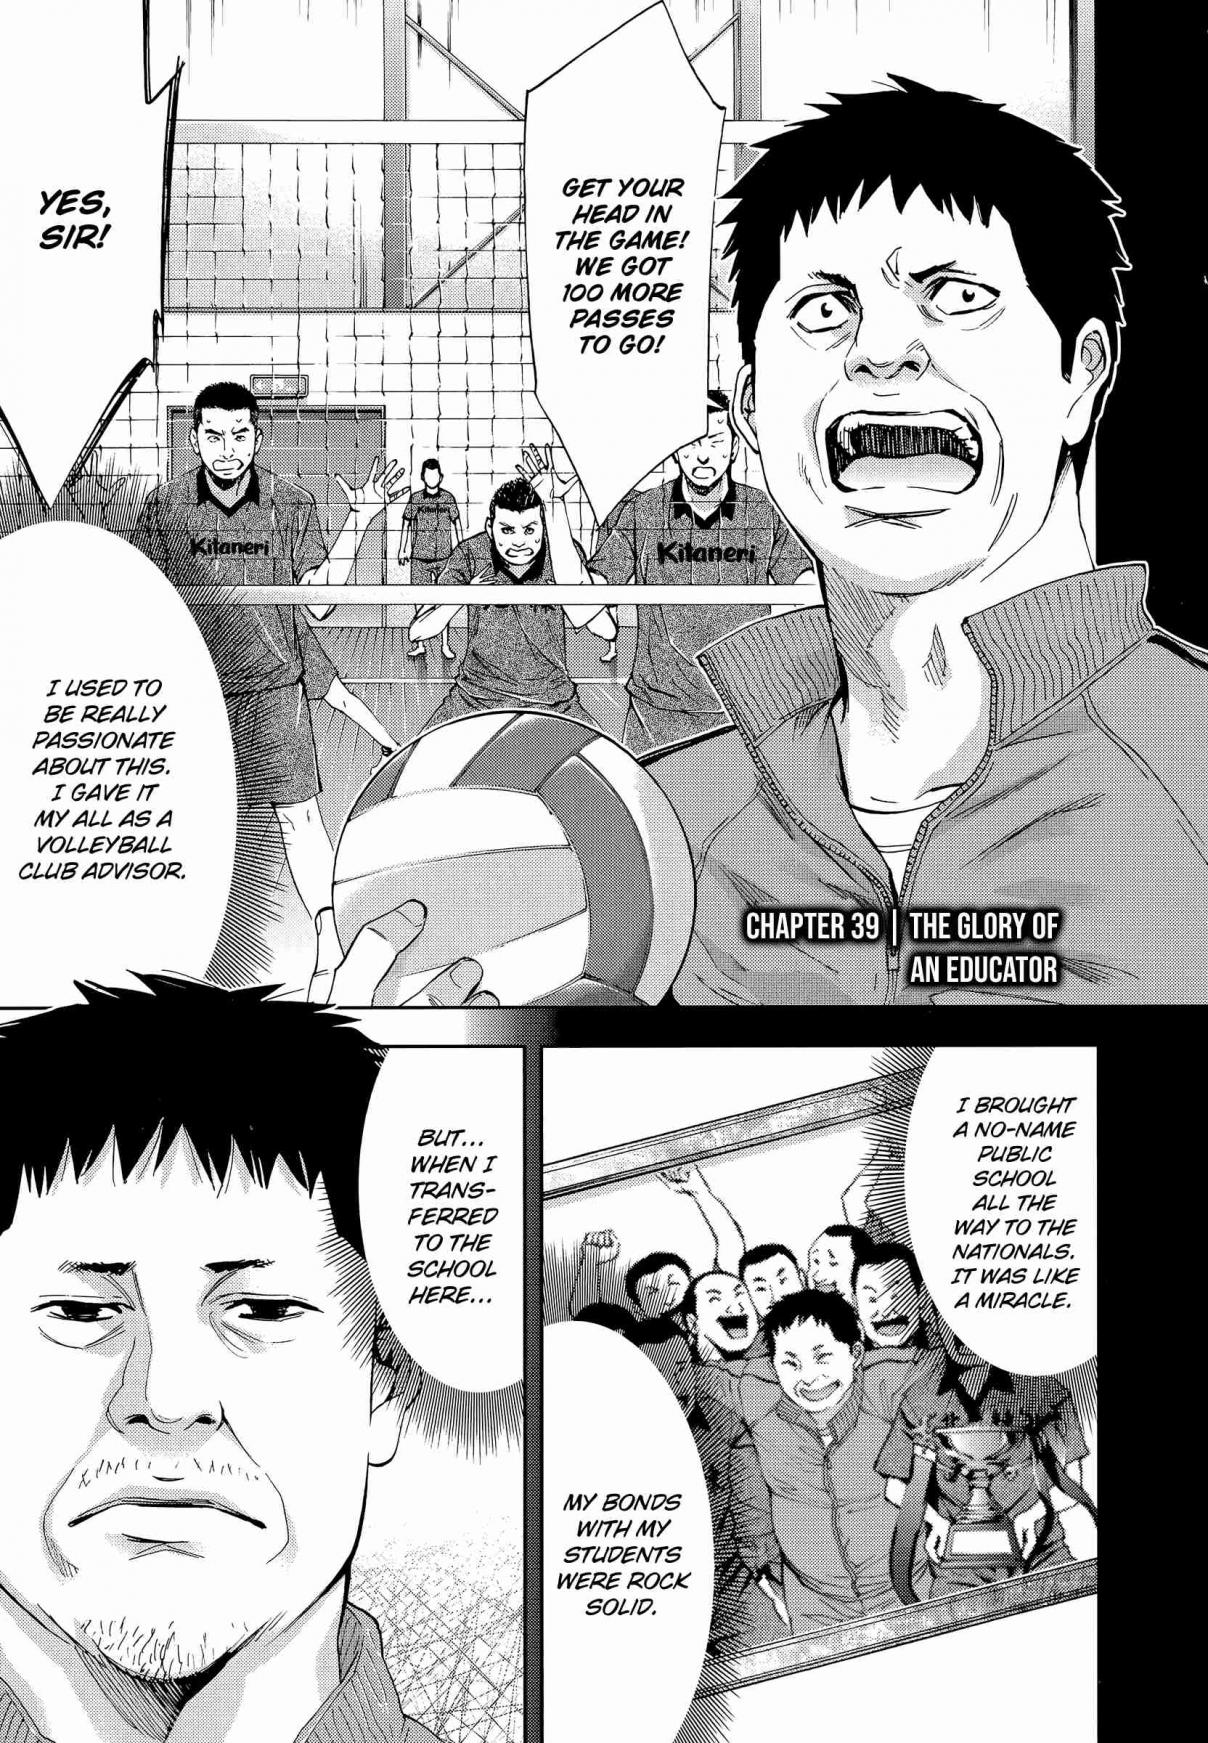 Funouhan Vol. 6 Ch. 39 The glory of an educator